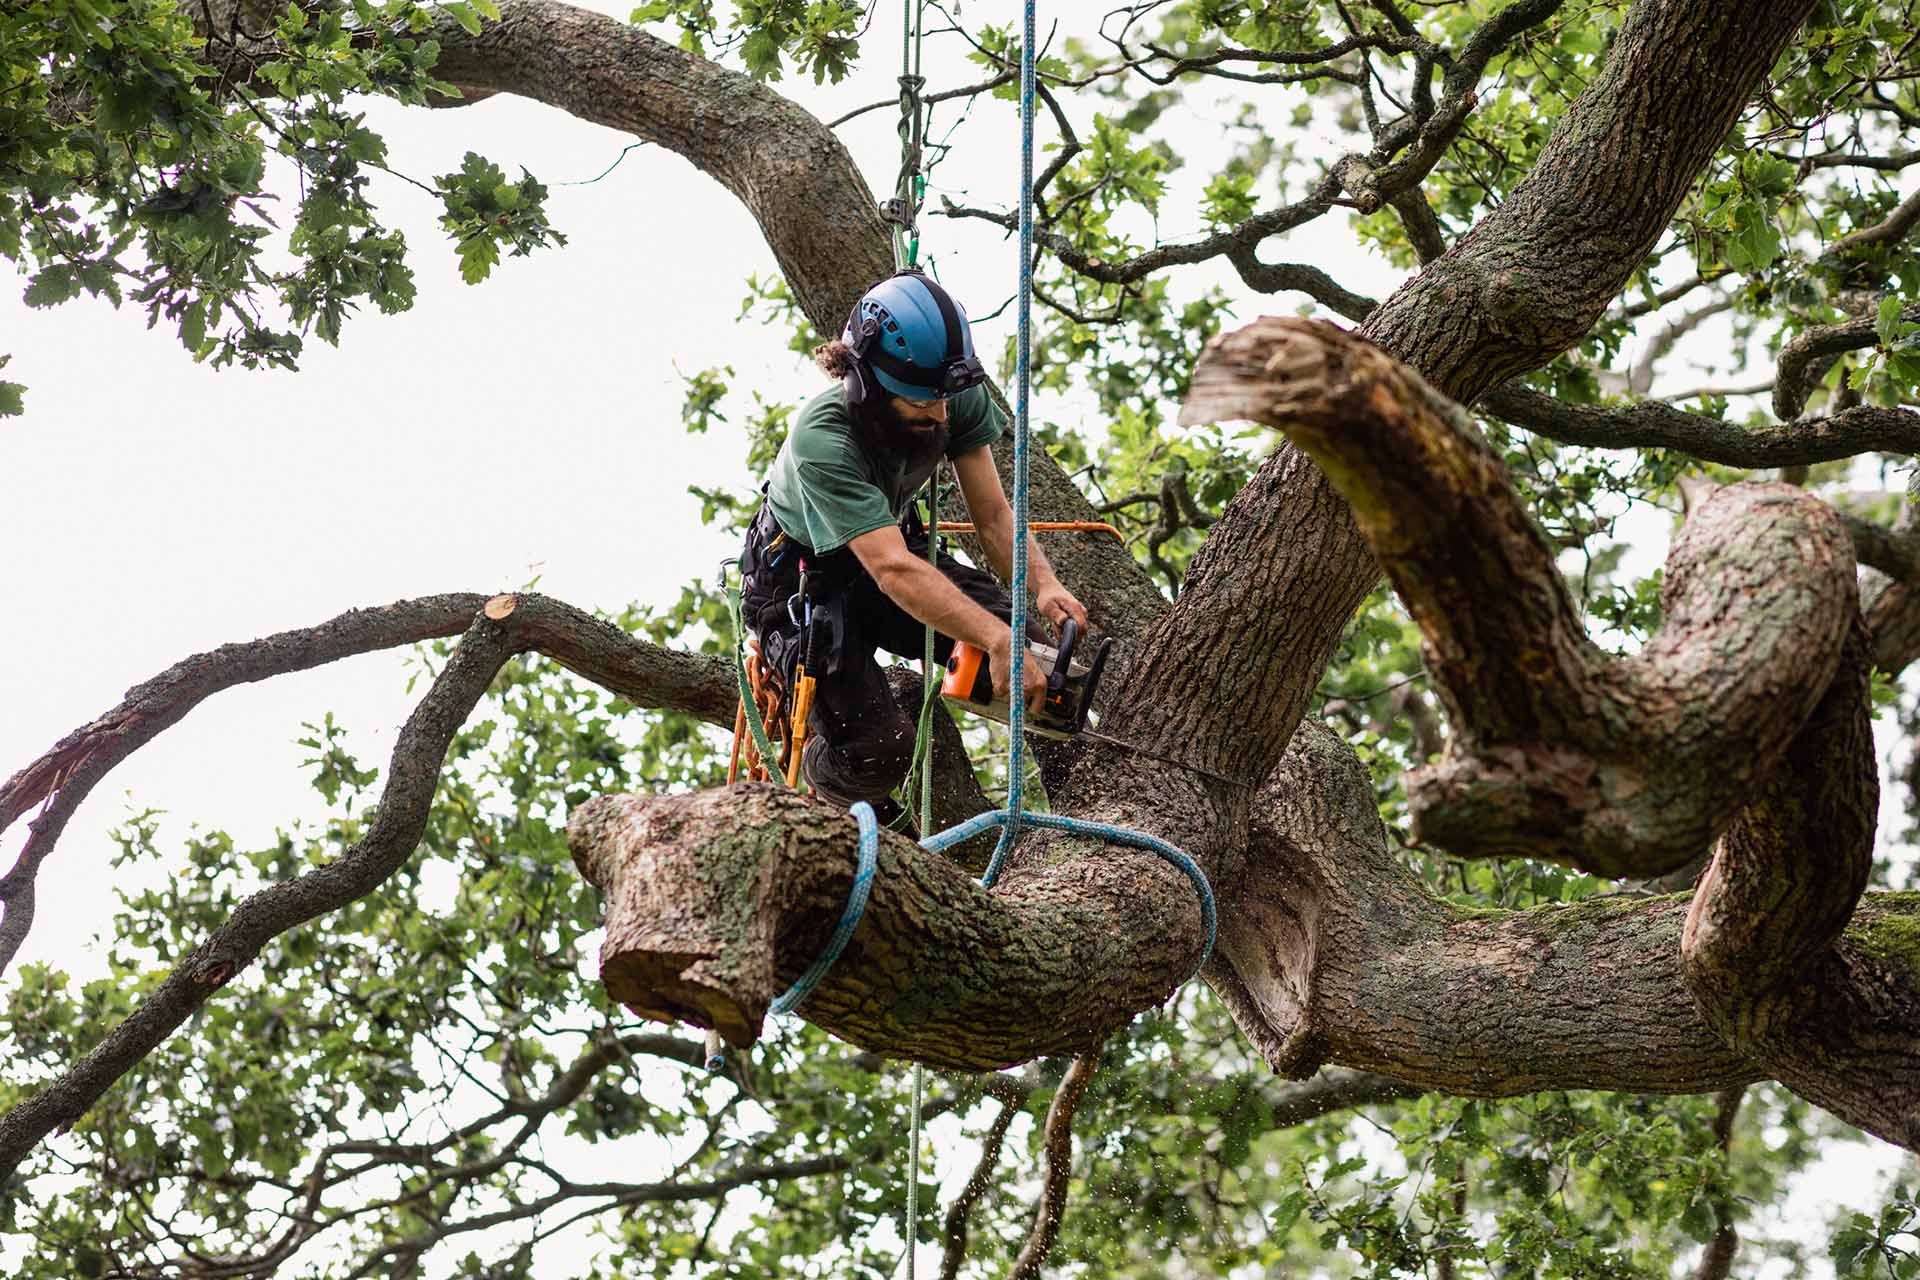 Man sawing tree at height wearing safety clothing in Pittsburgh, PS